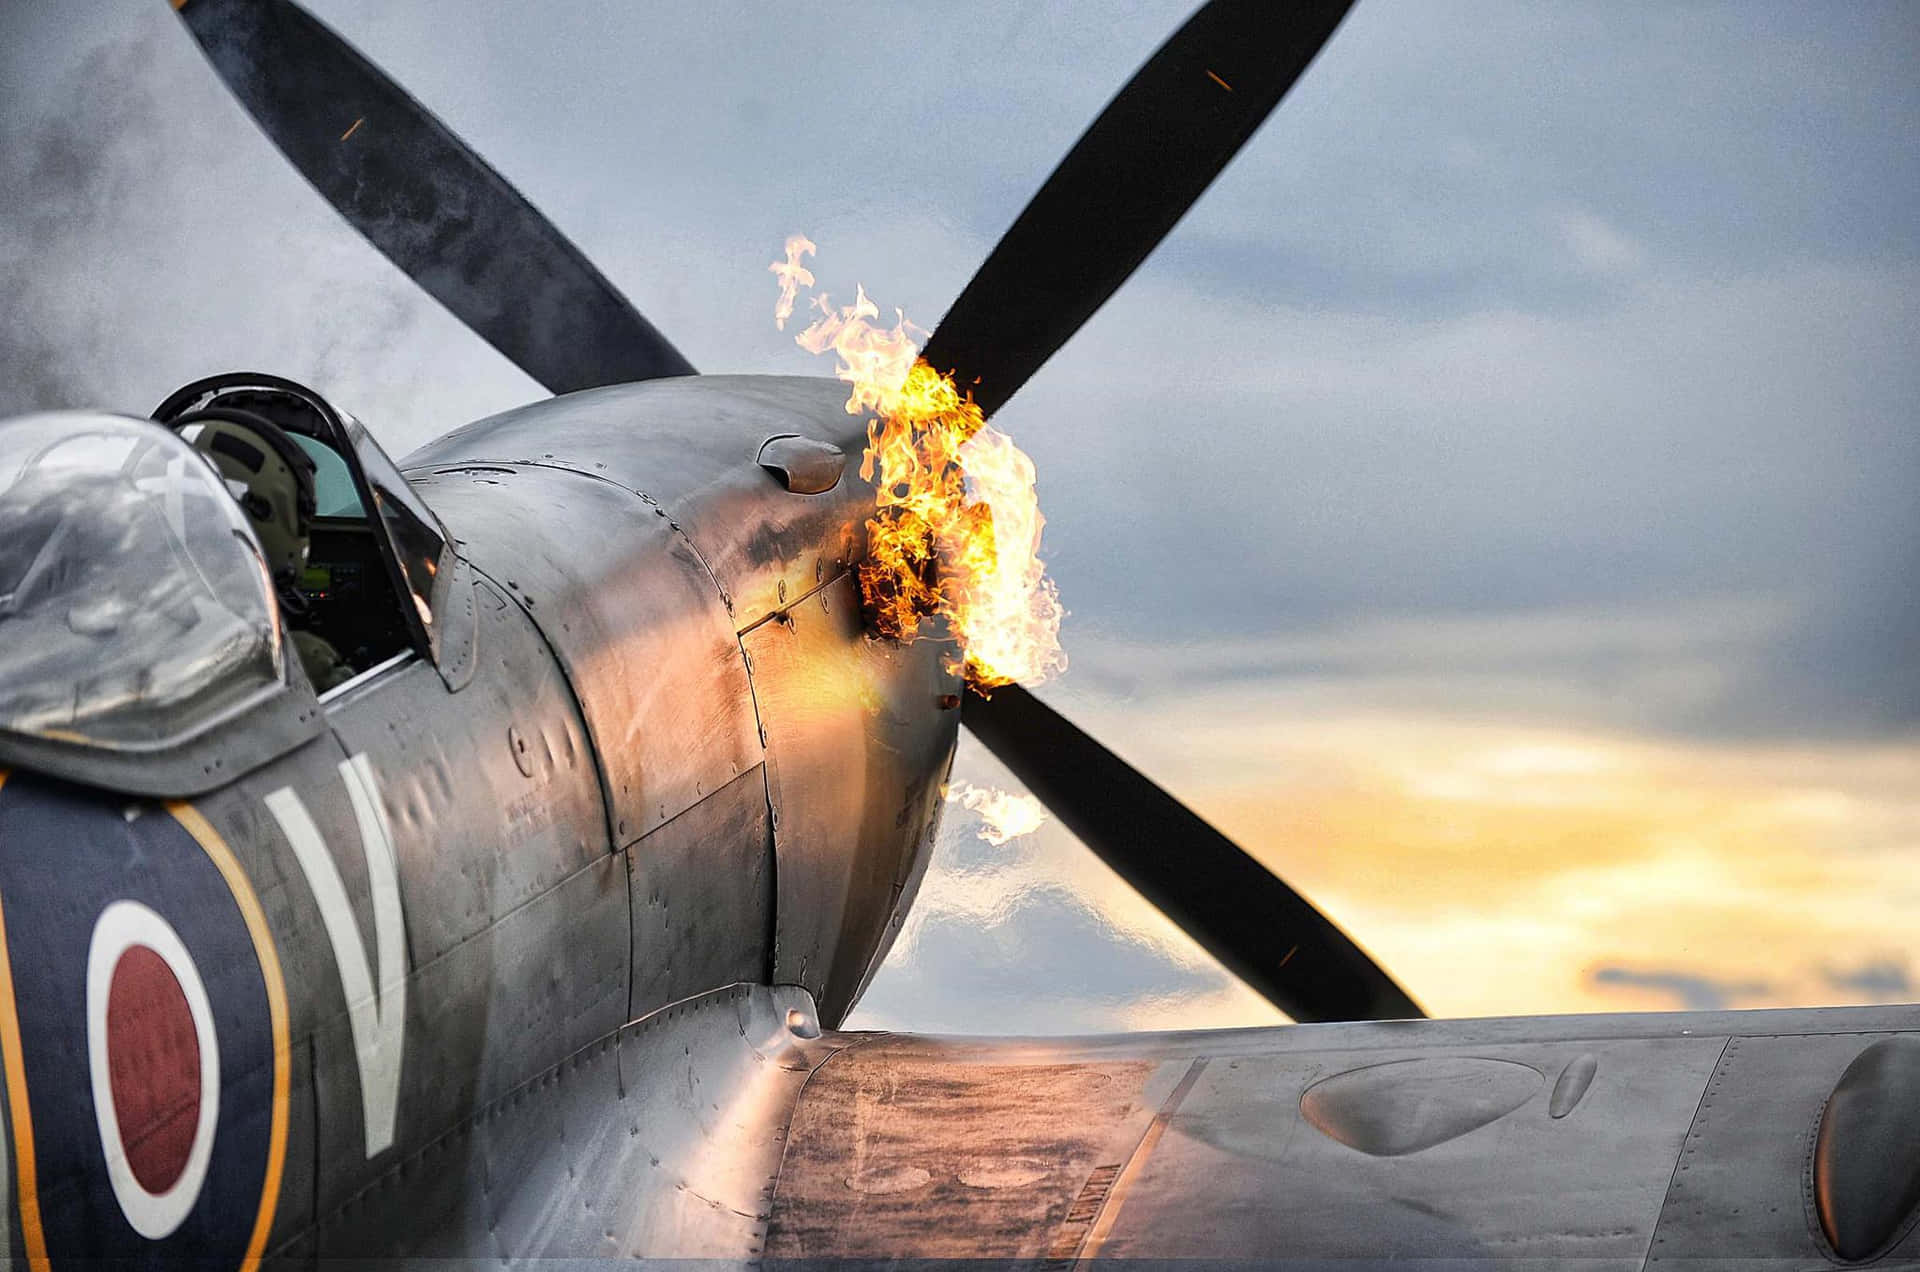 "The Iconic Spitfire Aircraft Soars Through the Sky" Wallpaper